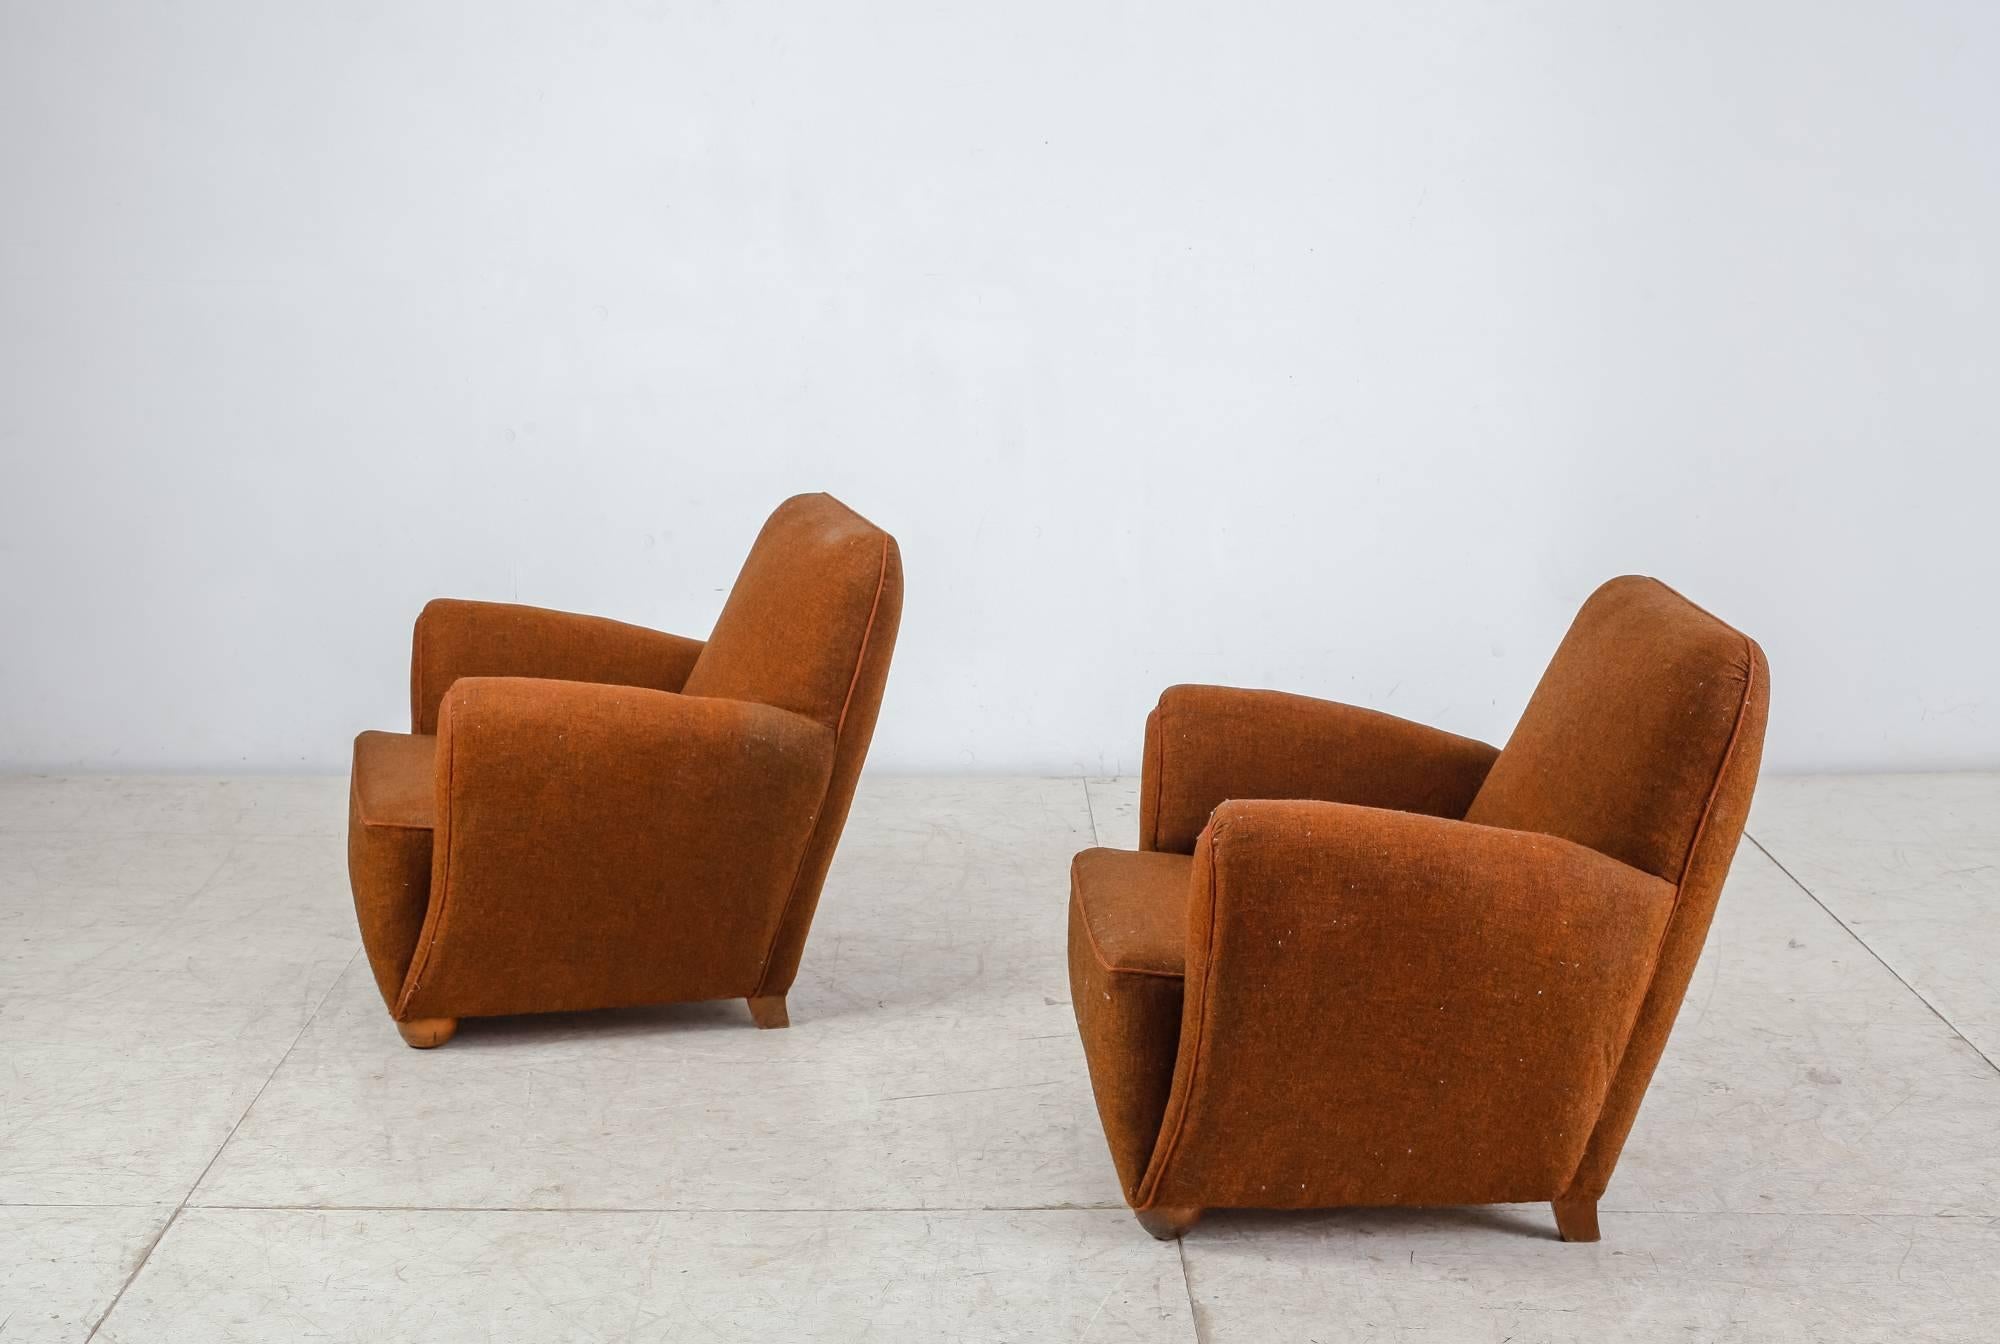 Pair of Danish Lounge Chairs with Brown Upholstery, 1940s In Excellent Condition For Sale In Maastricht, NL